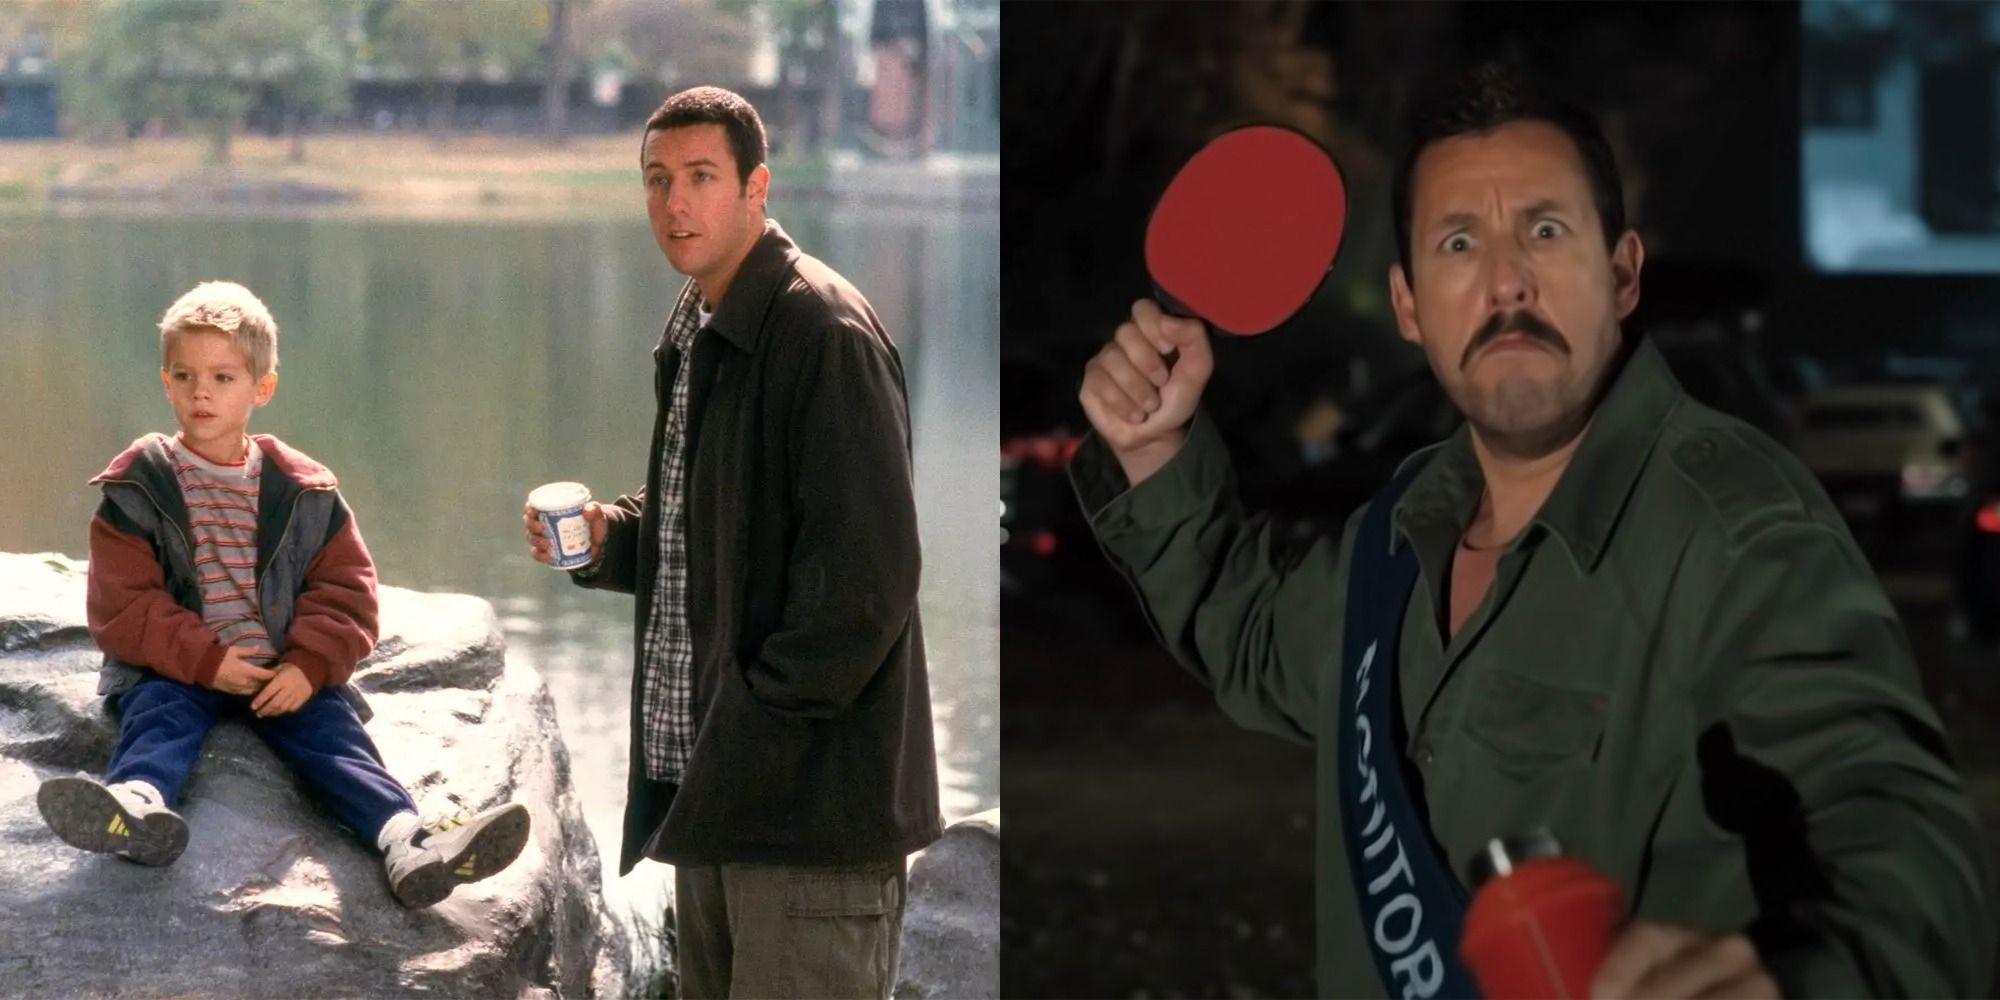 10 Best Movies Written By Adam Sandler Ranked, According To Letterboxd